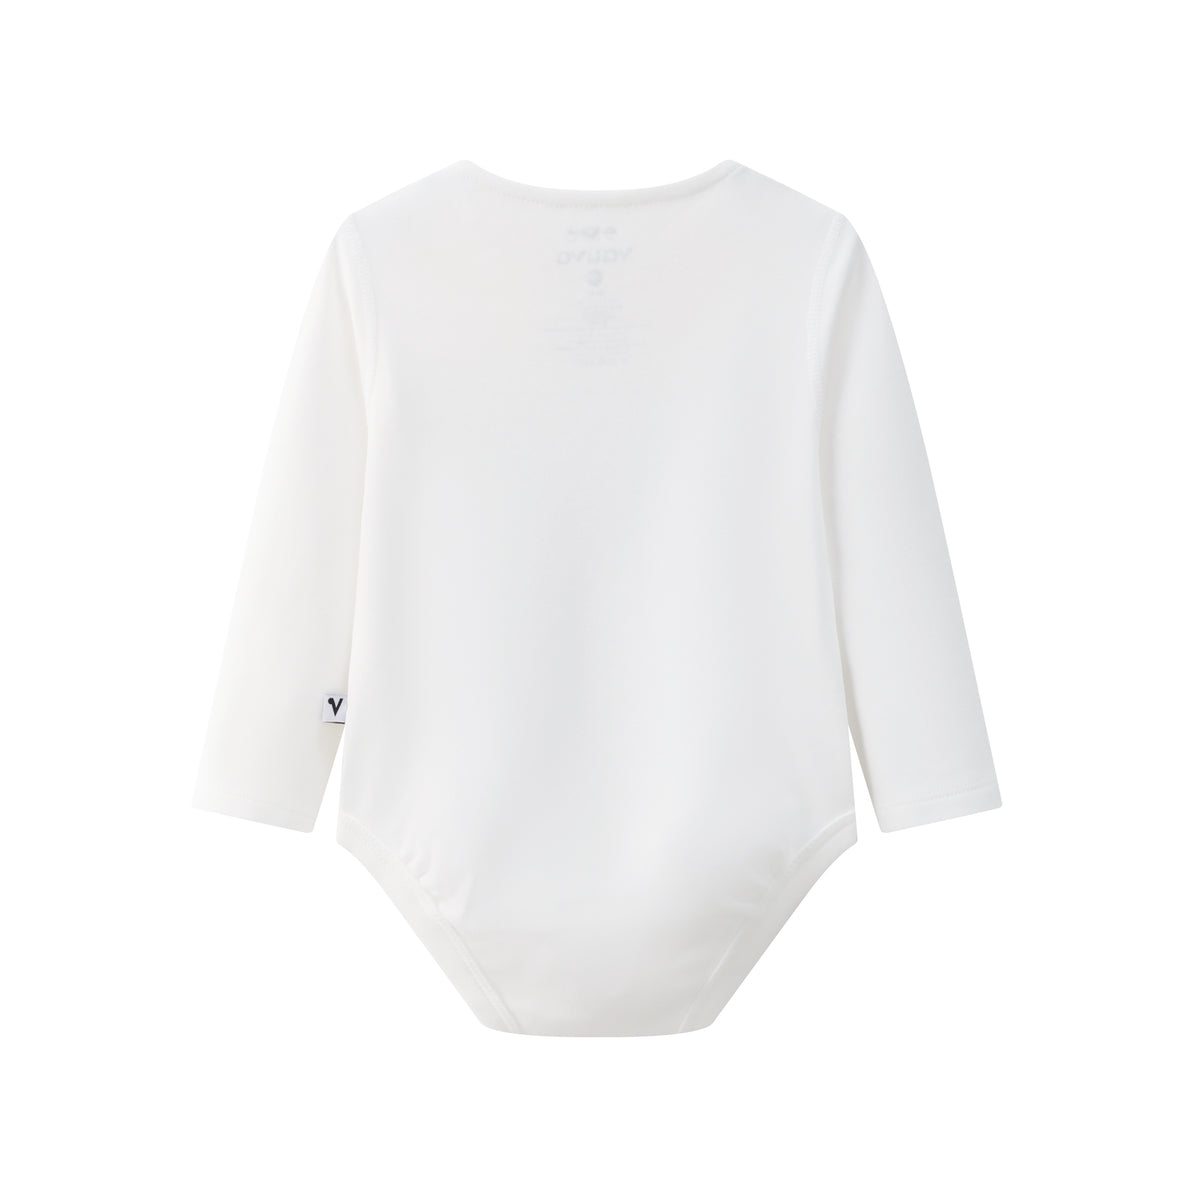 Vauva BBNS - Baby Anti-bacterial Organic Cotton Bodysuits (2-pack) product image back